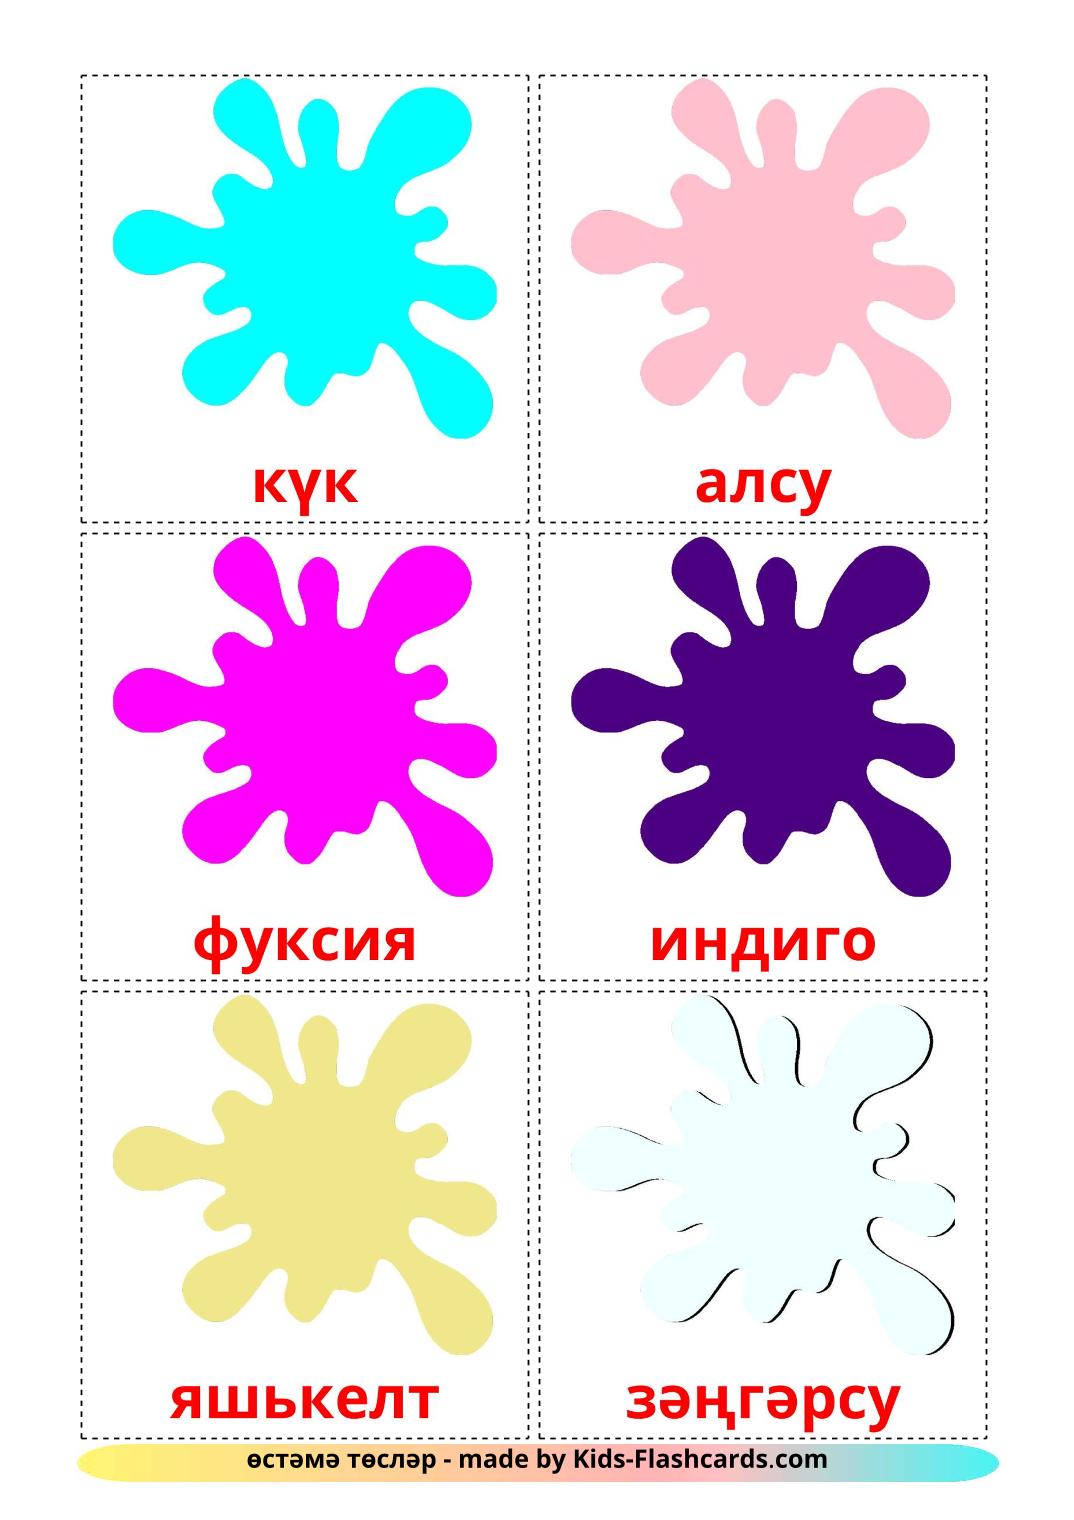 Secondary colors - 20 Free Printable tatar Flashcards 